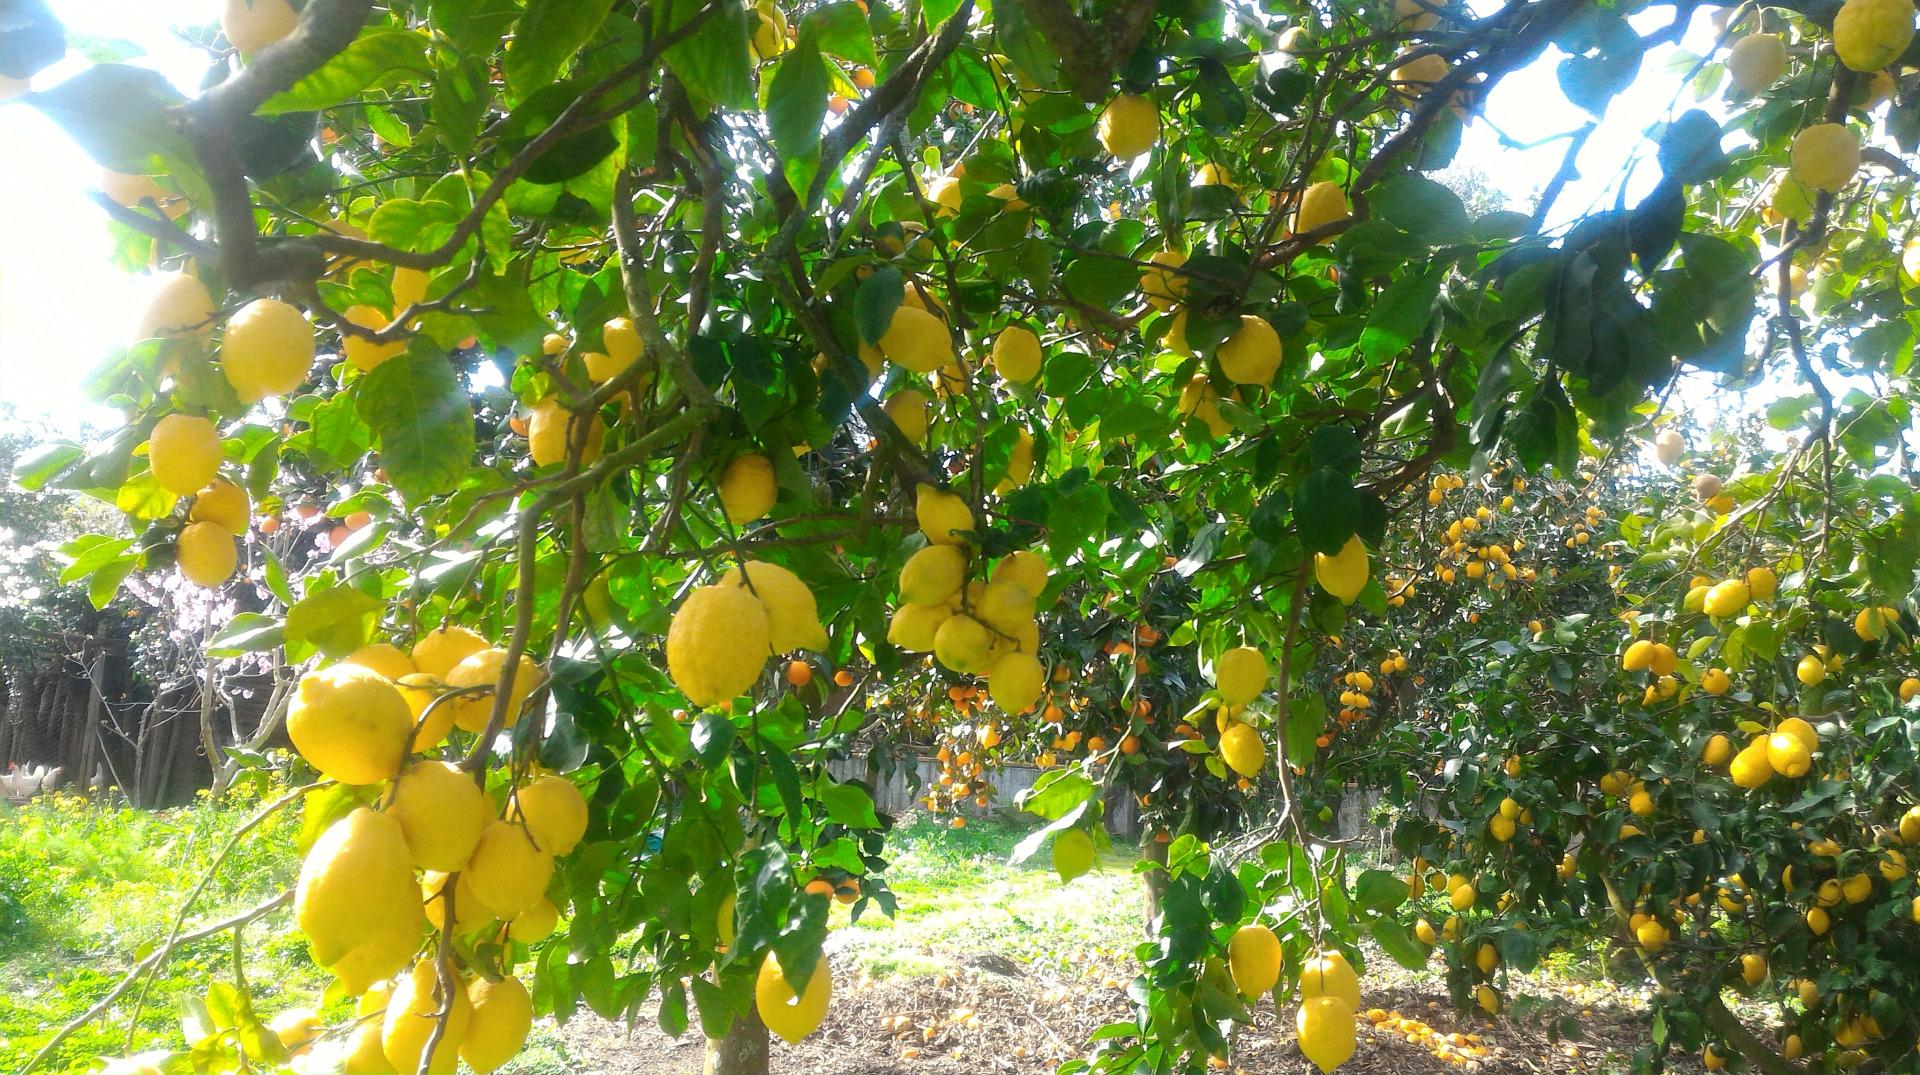 Visit our typical Sorrento garden with lemon grove-12